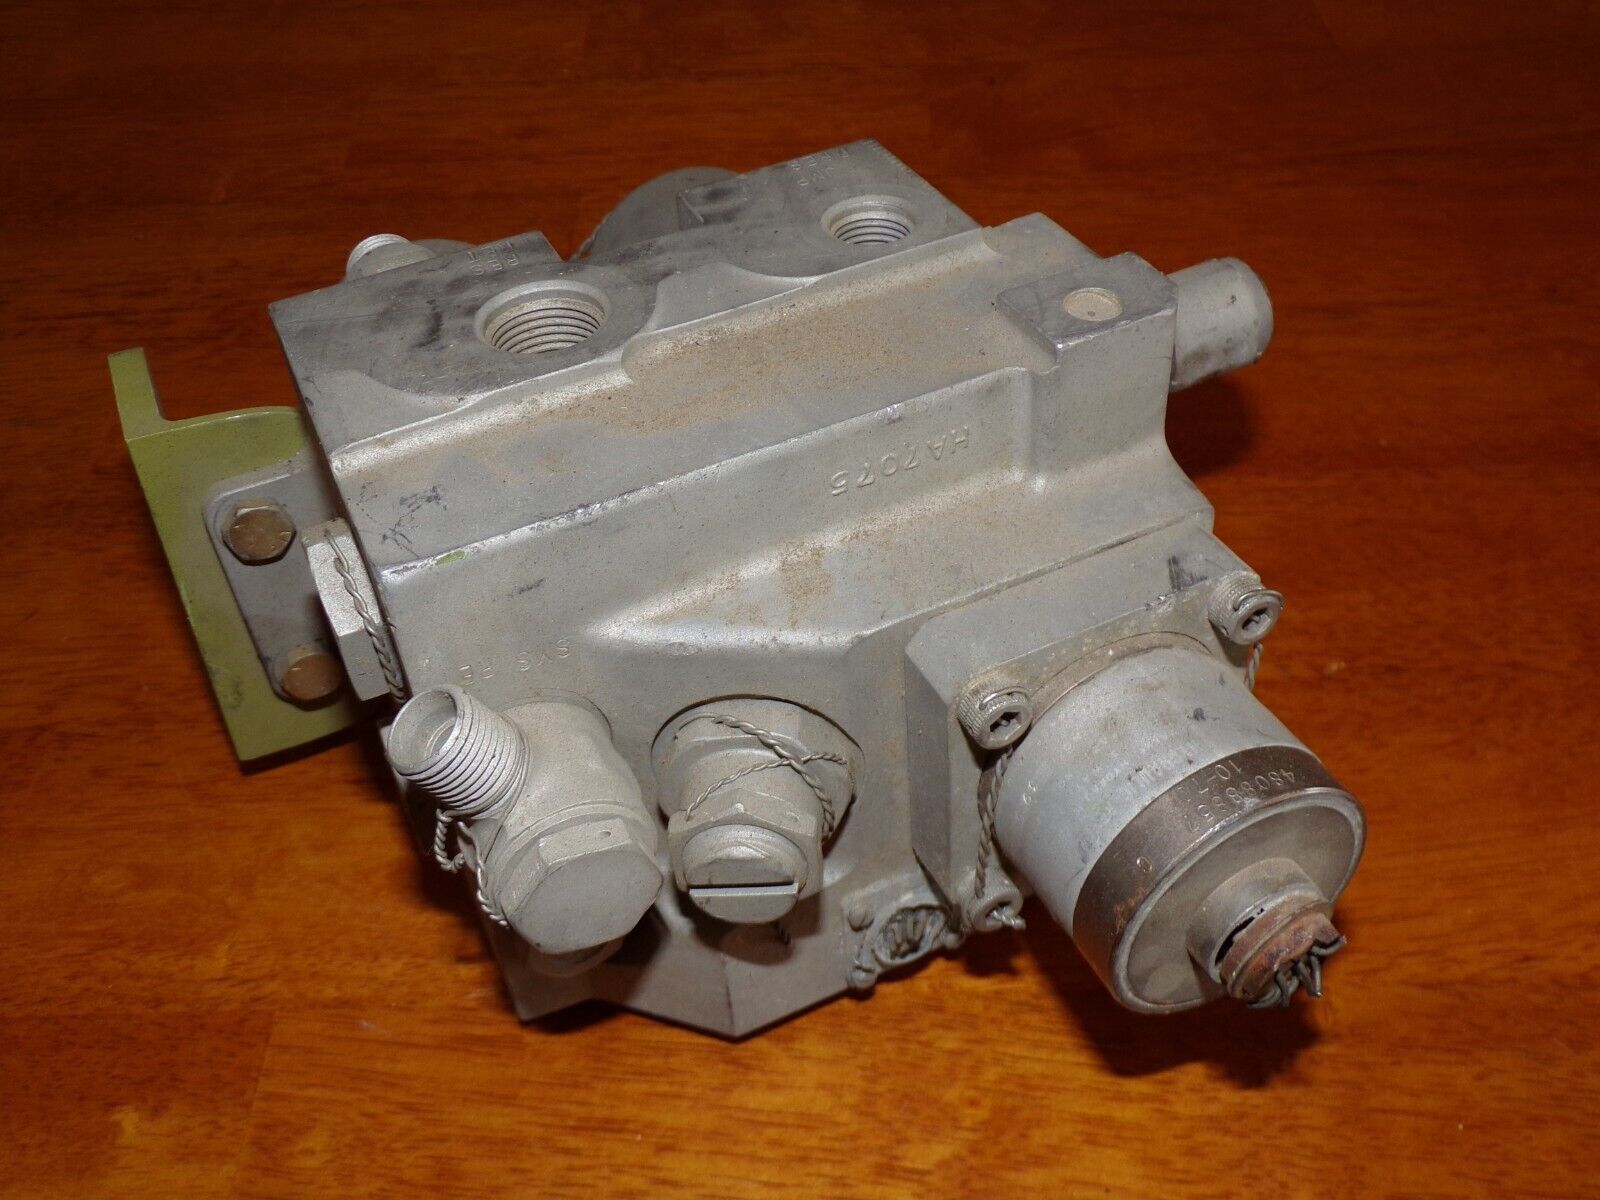 Bell Helicopter Hydraulic Solenoid Valve 48088857 (parts, repair, training)